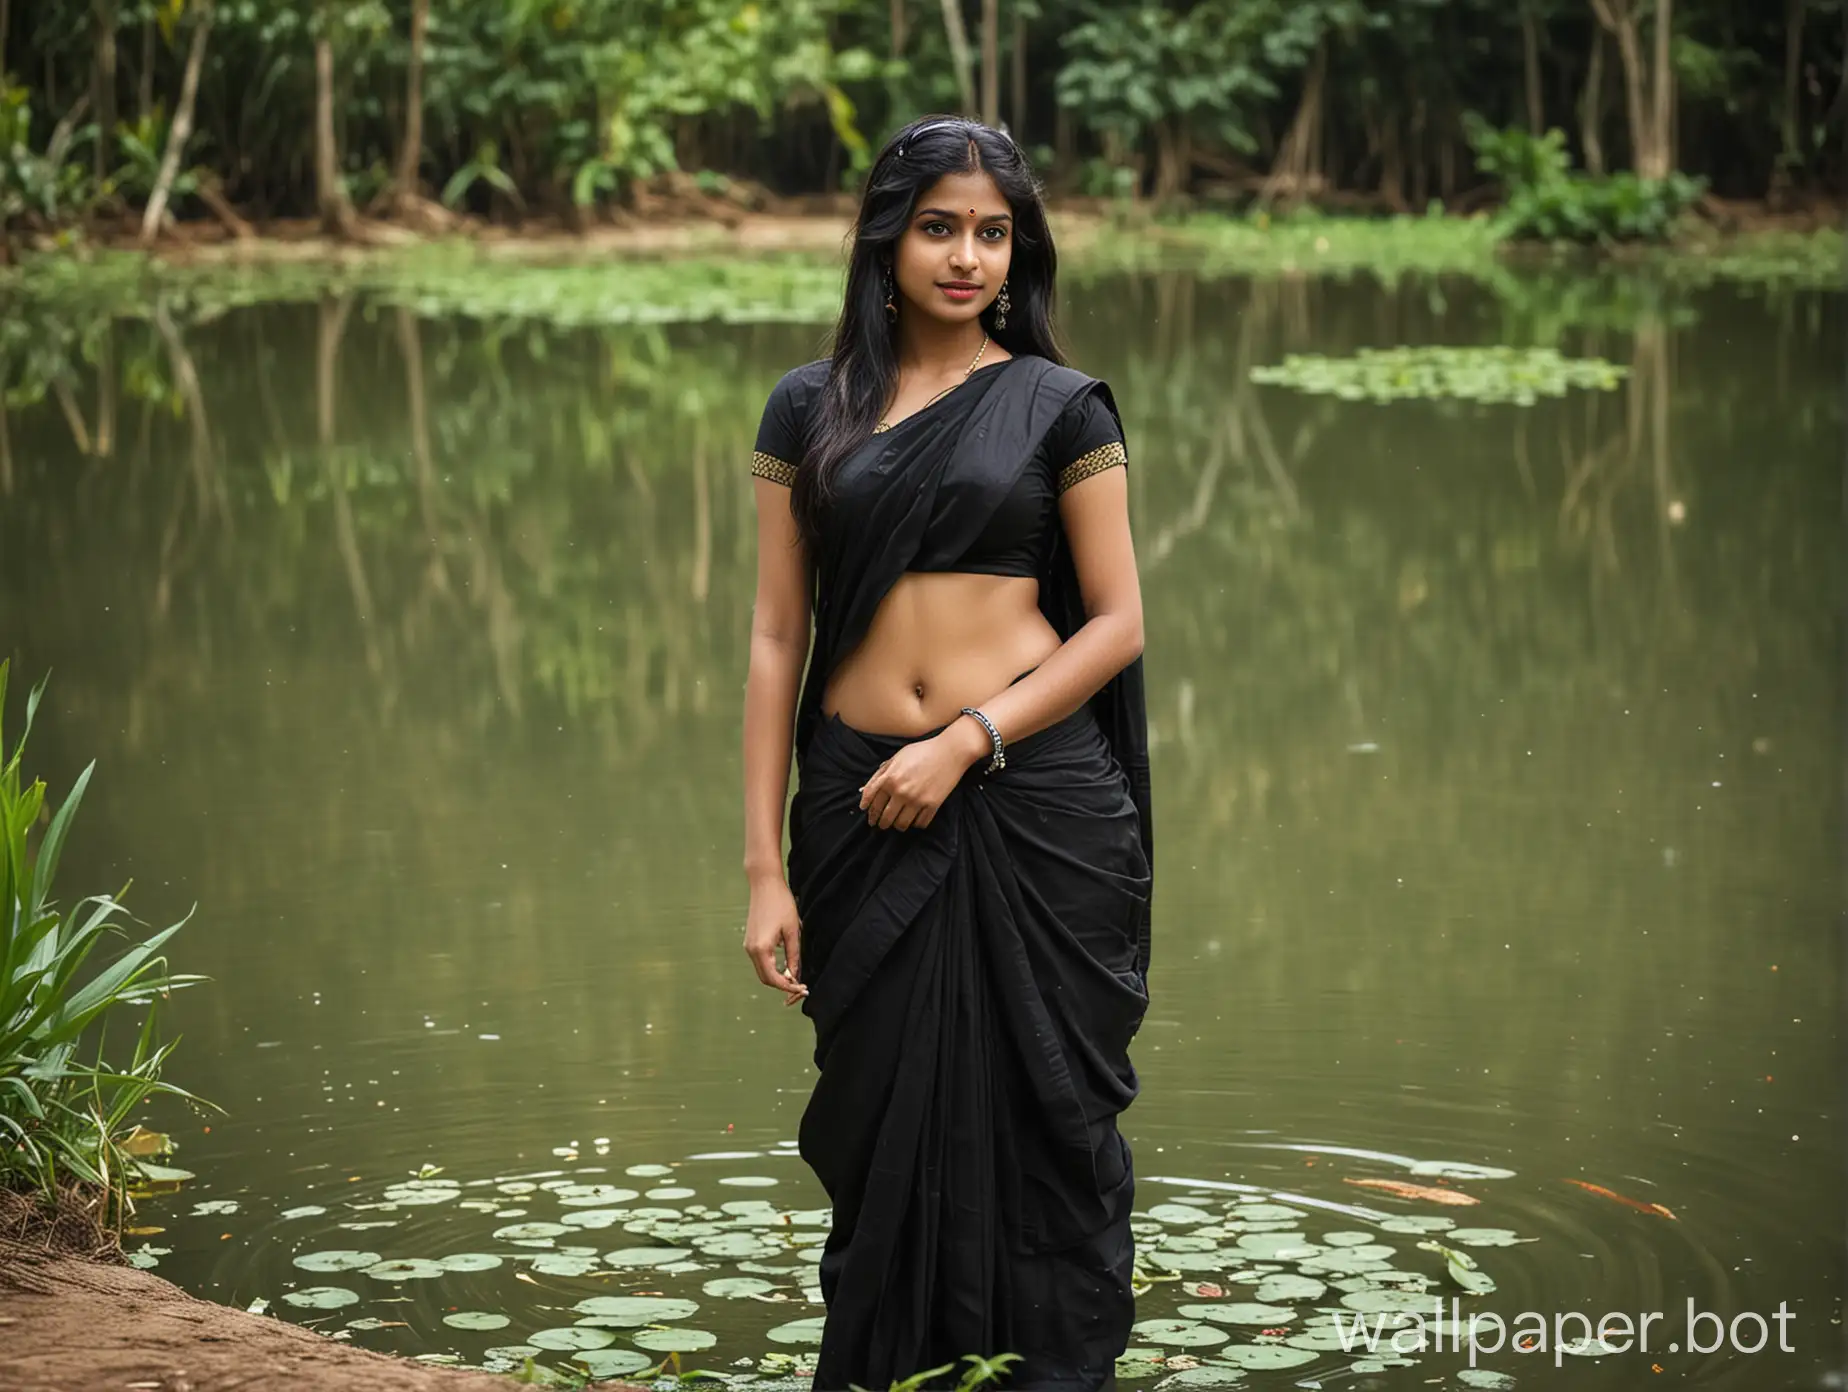 create a wallpaper of a kerala girl wearing a black sari and showing navel of her. the background should a pond and it should be in blur mode and feels like the image is taken from a dslr camera.